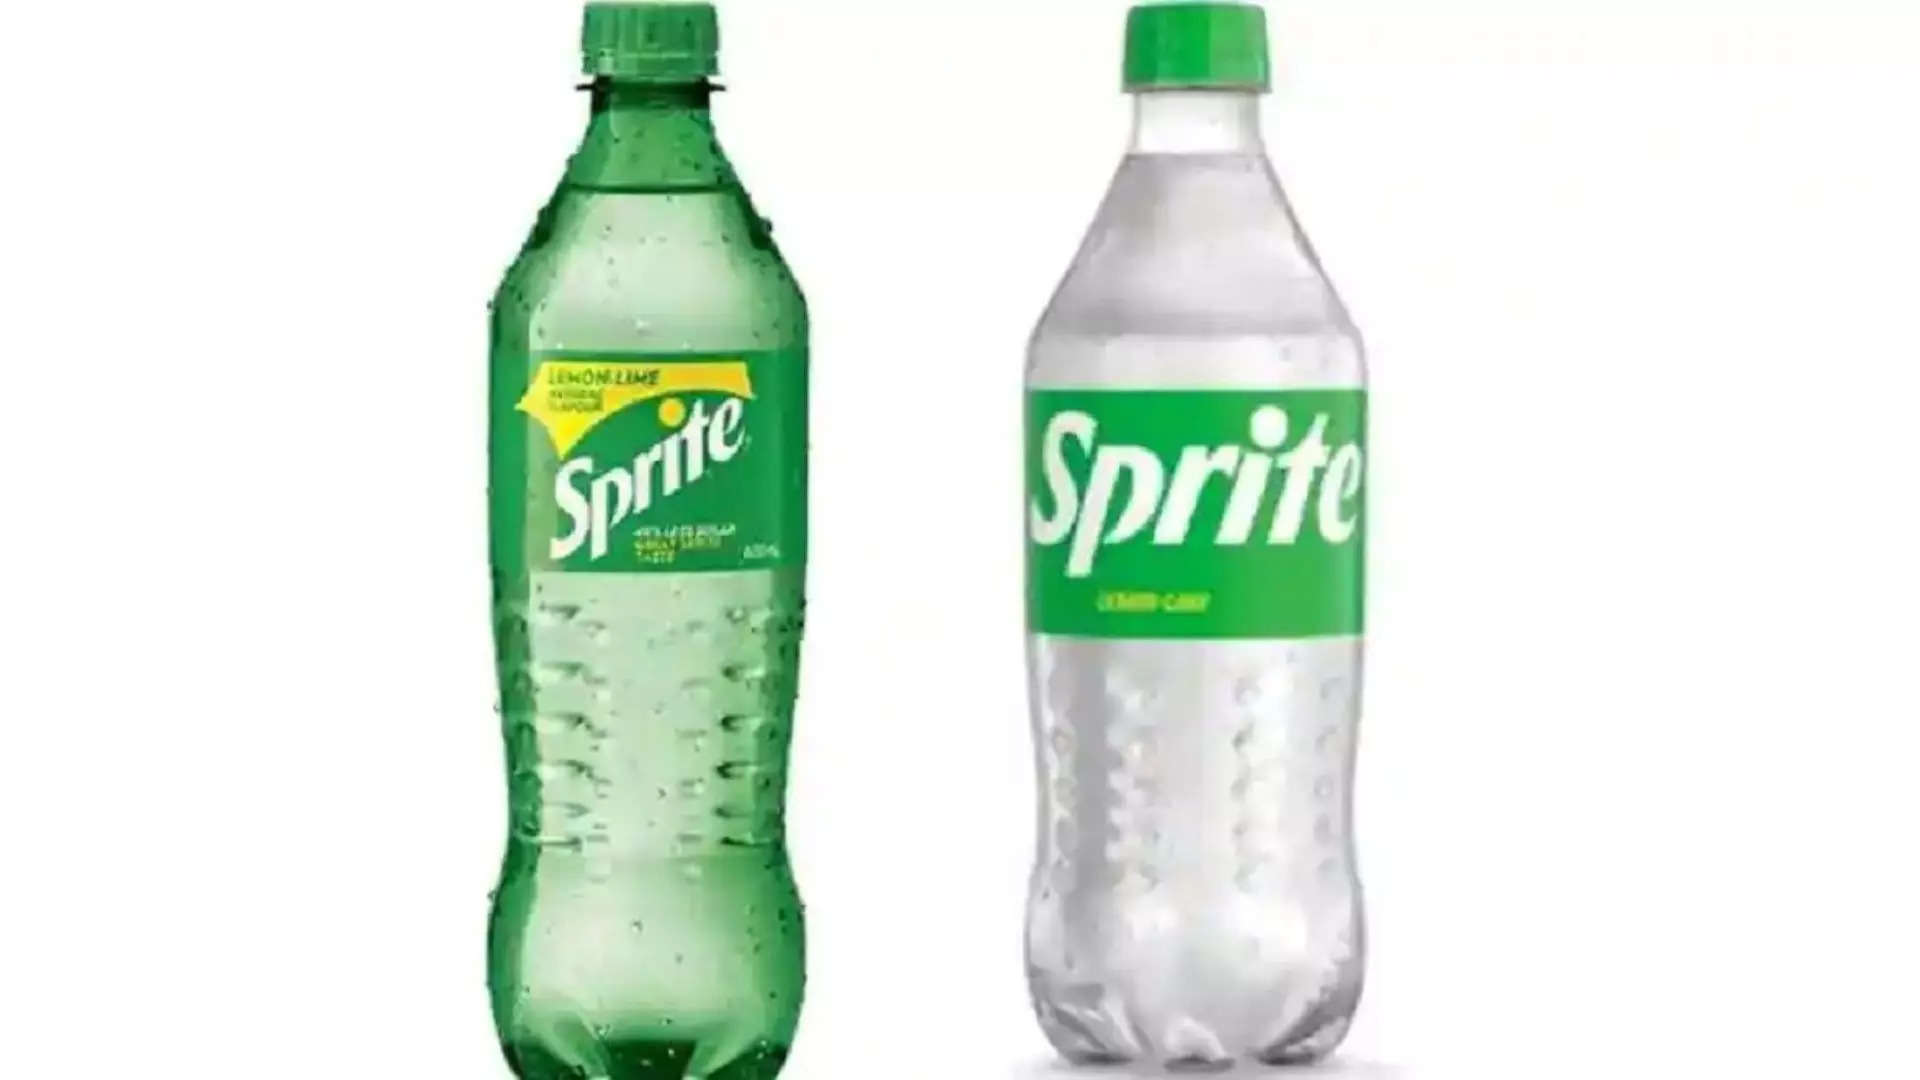 Sprite is retiring its 'iconic' green bottle after over 60 years